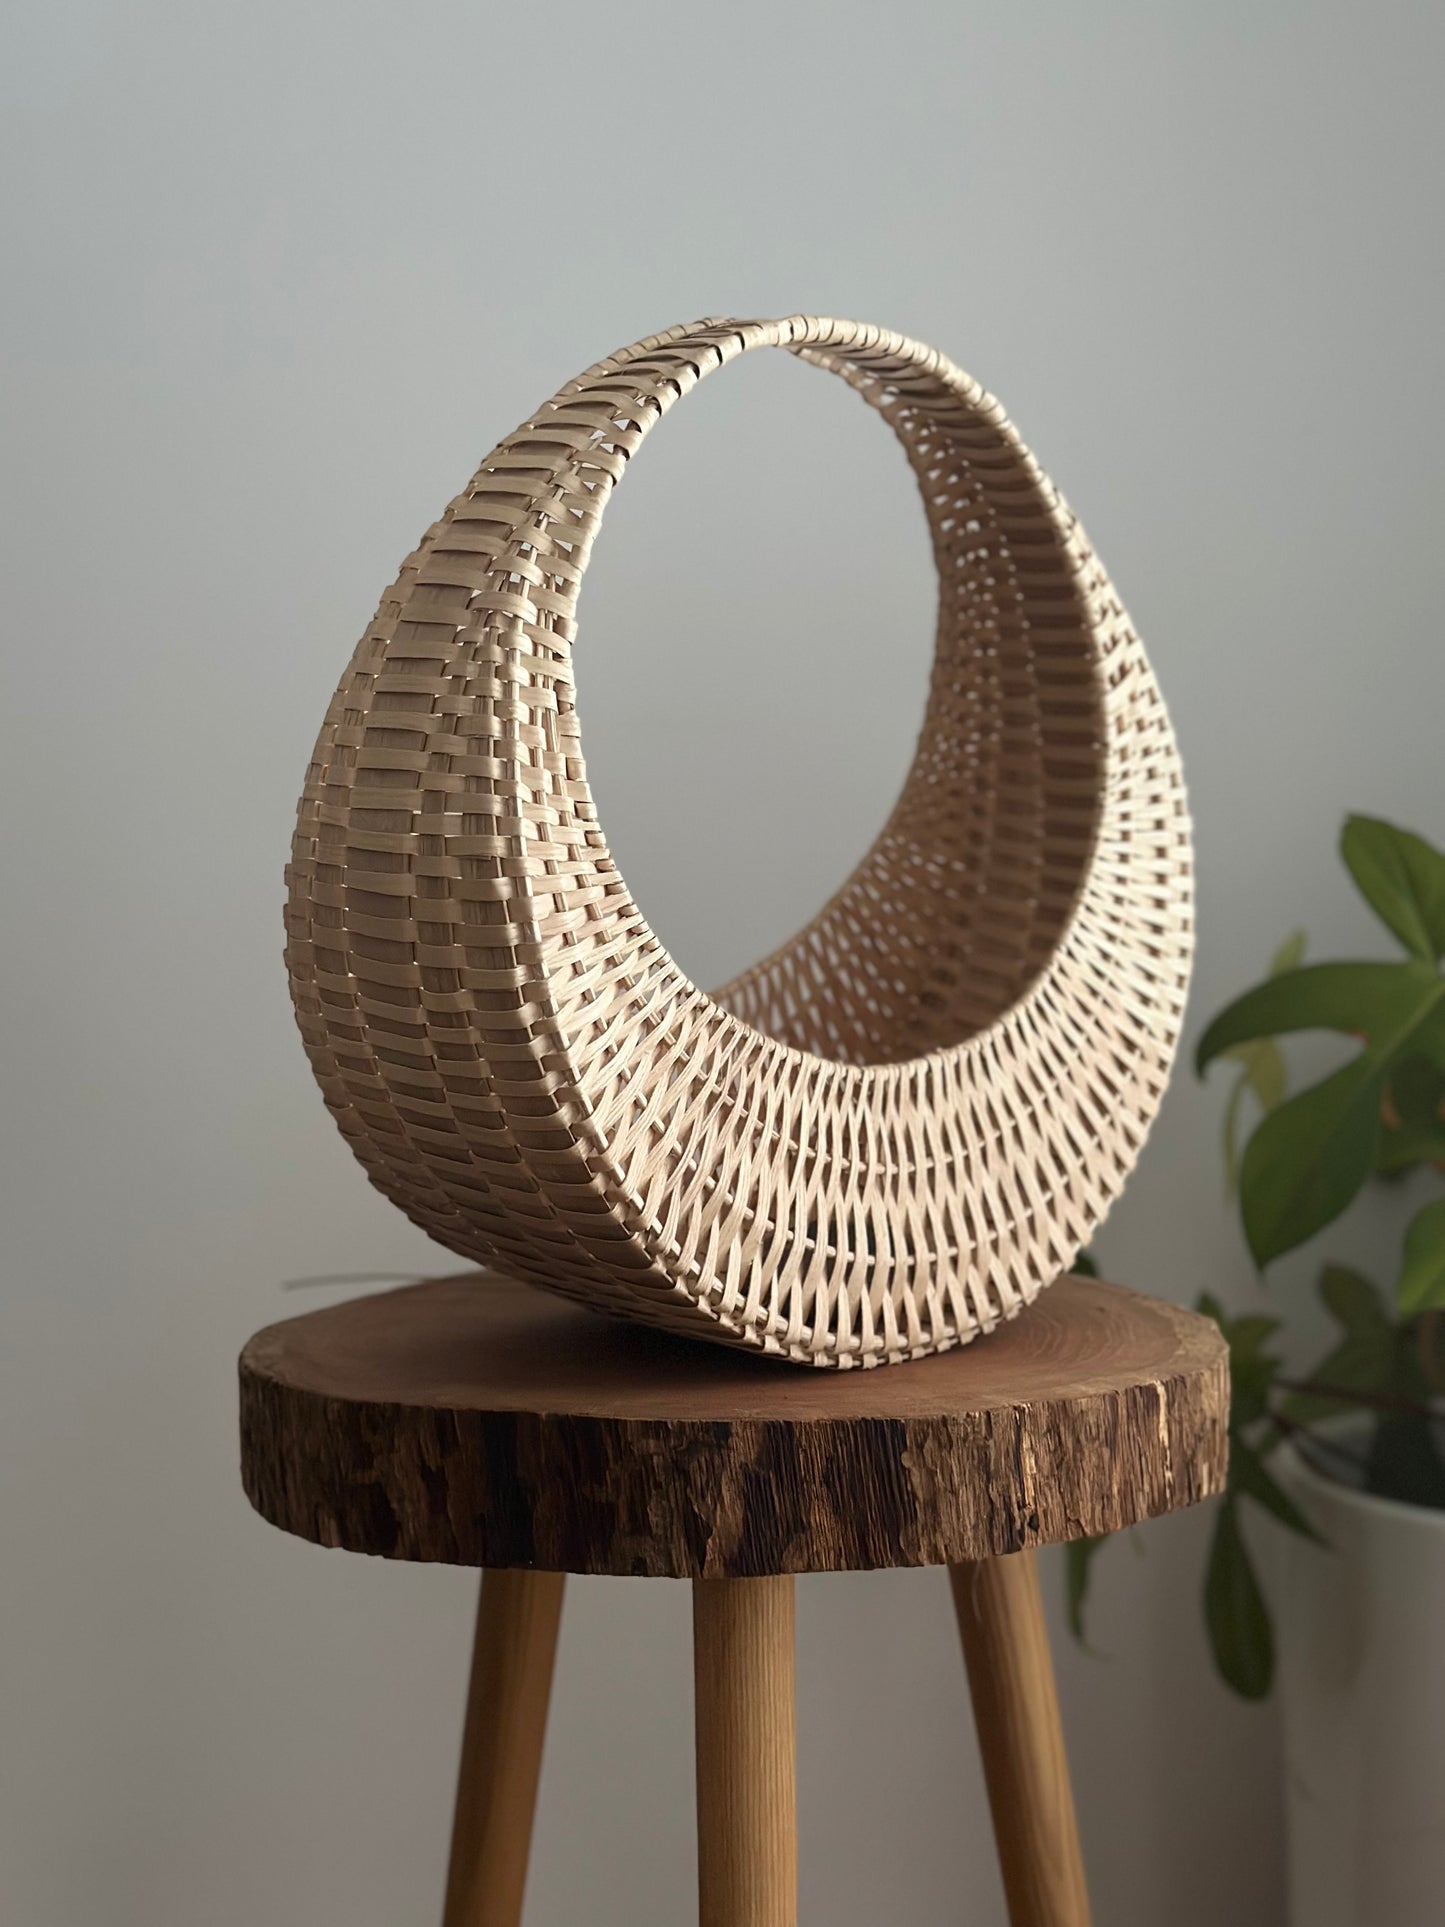 Waxing Crescent Basket Sculpture - MADE TO ORDER